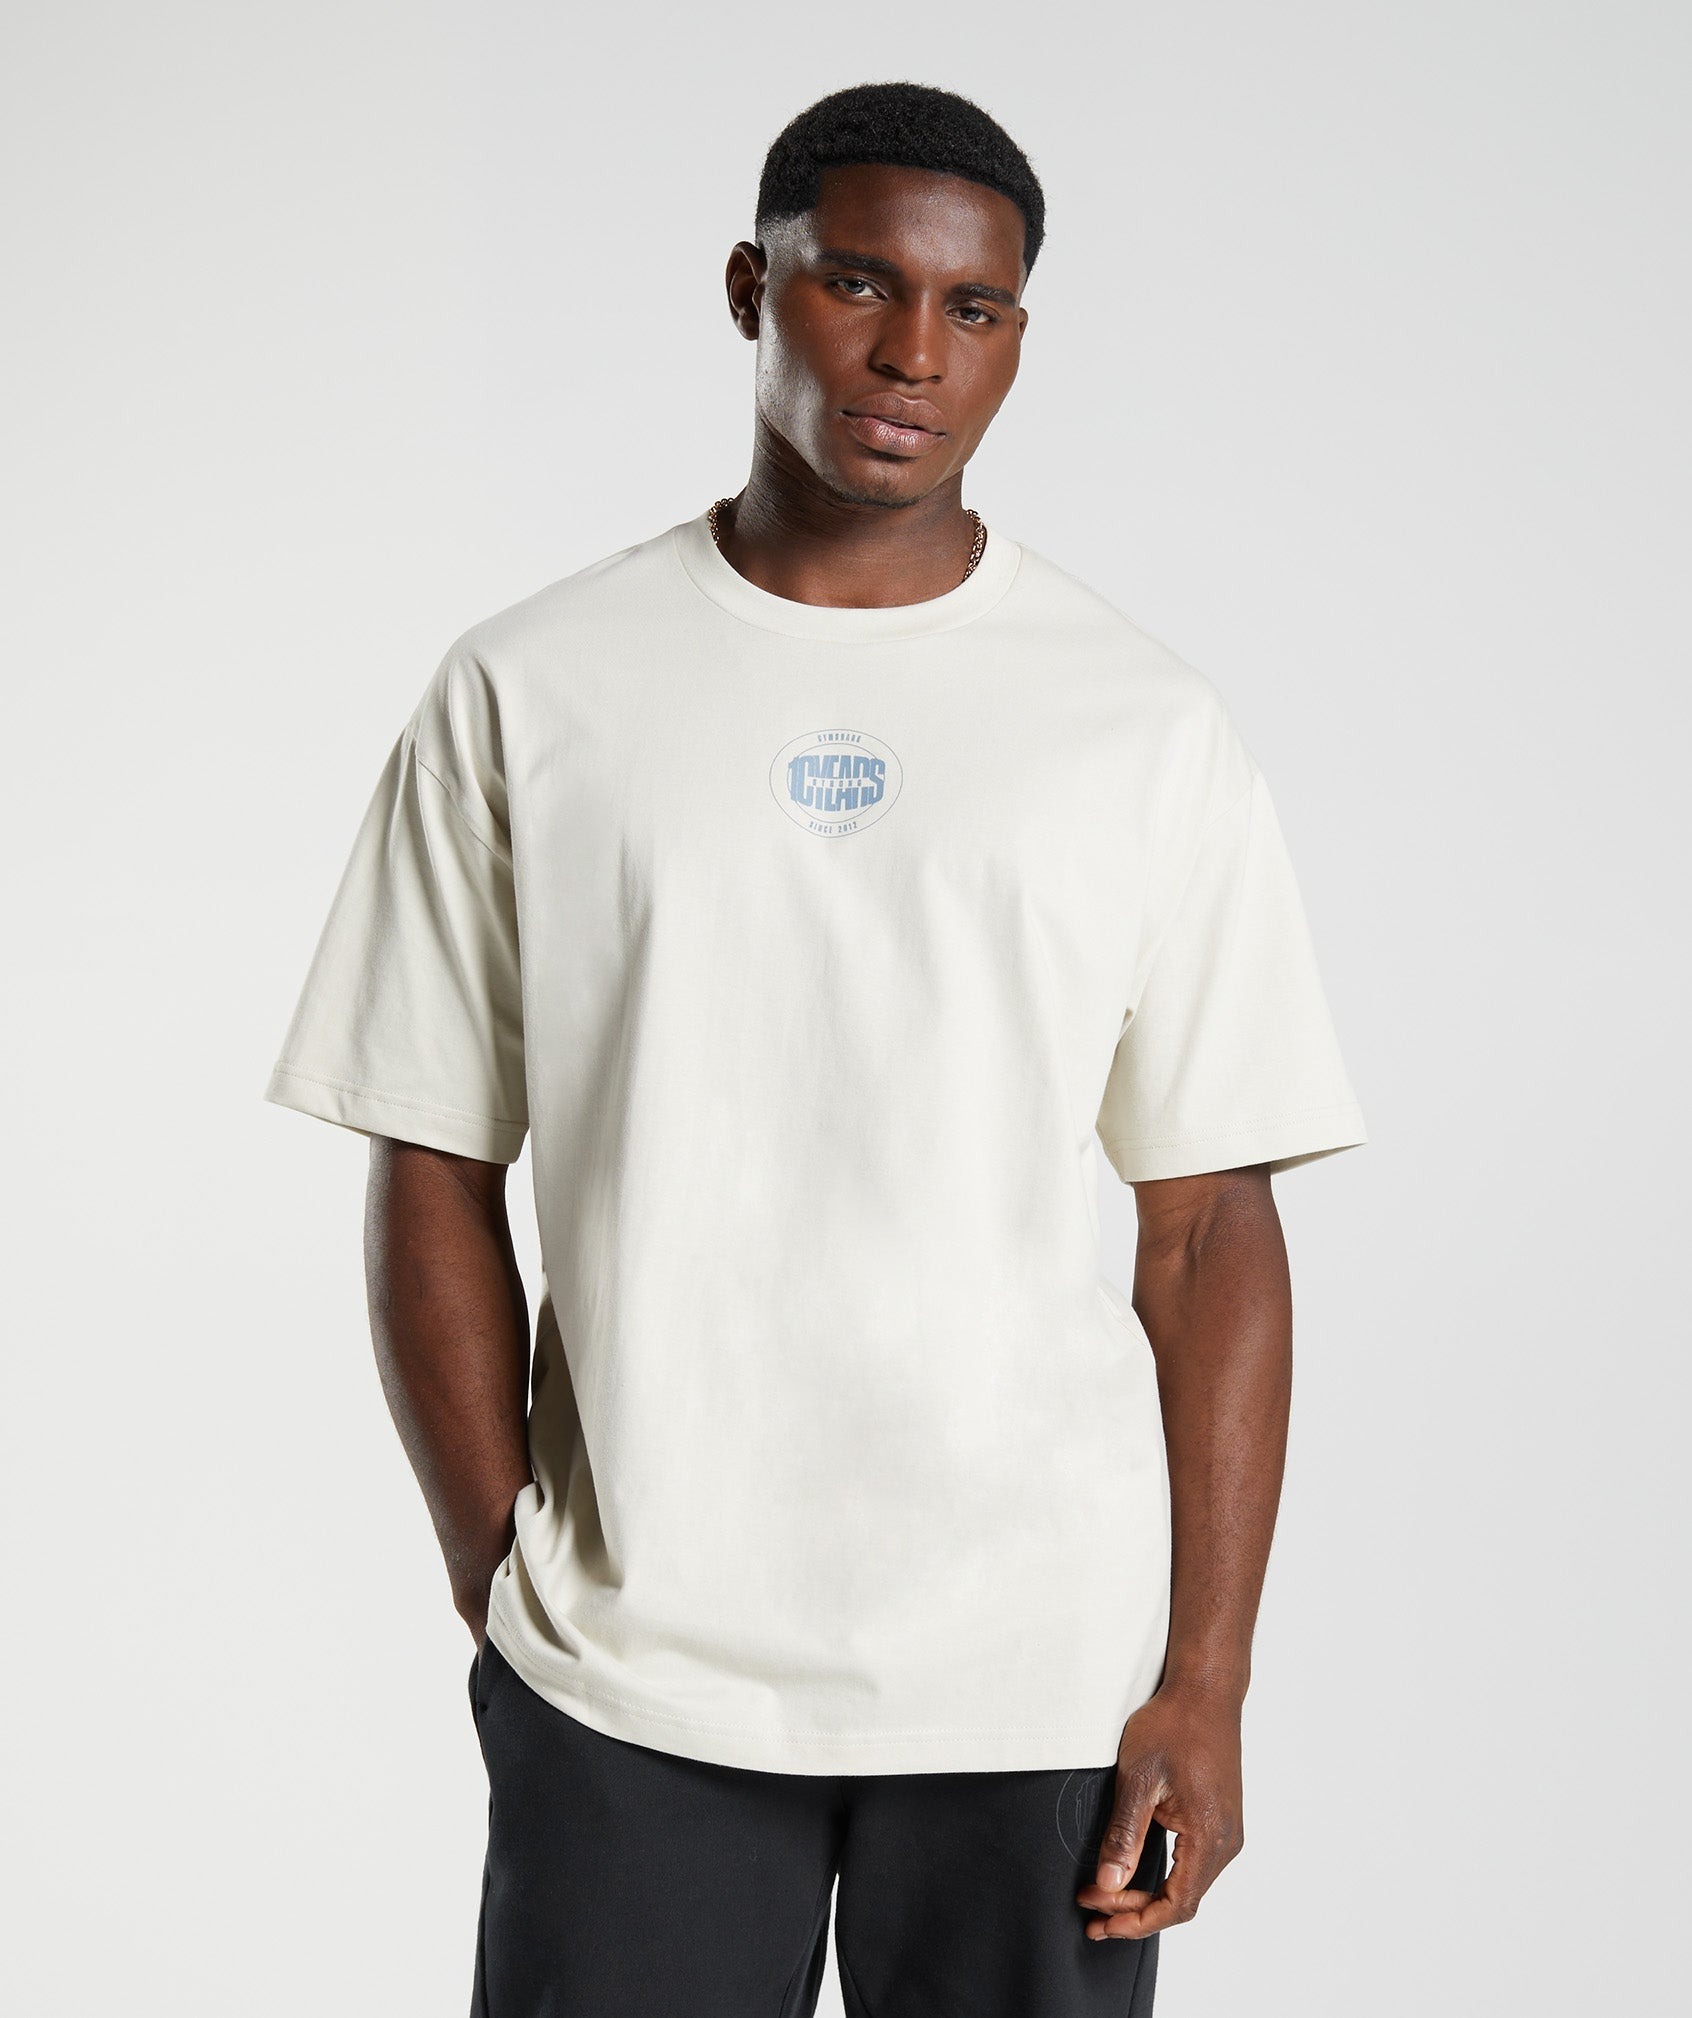 GS10 YEAR OVERSIZED TEE – CHALKY GREY (AUTHENTIC) – Brofit